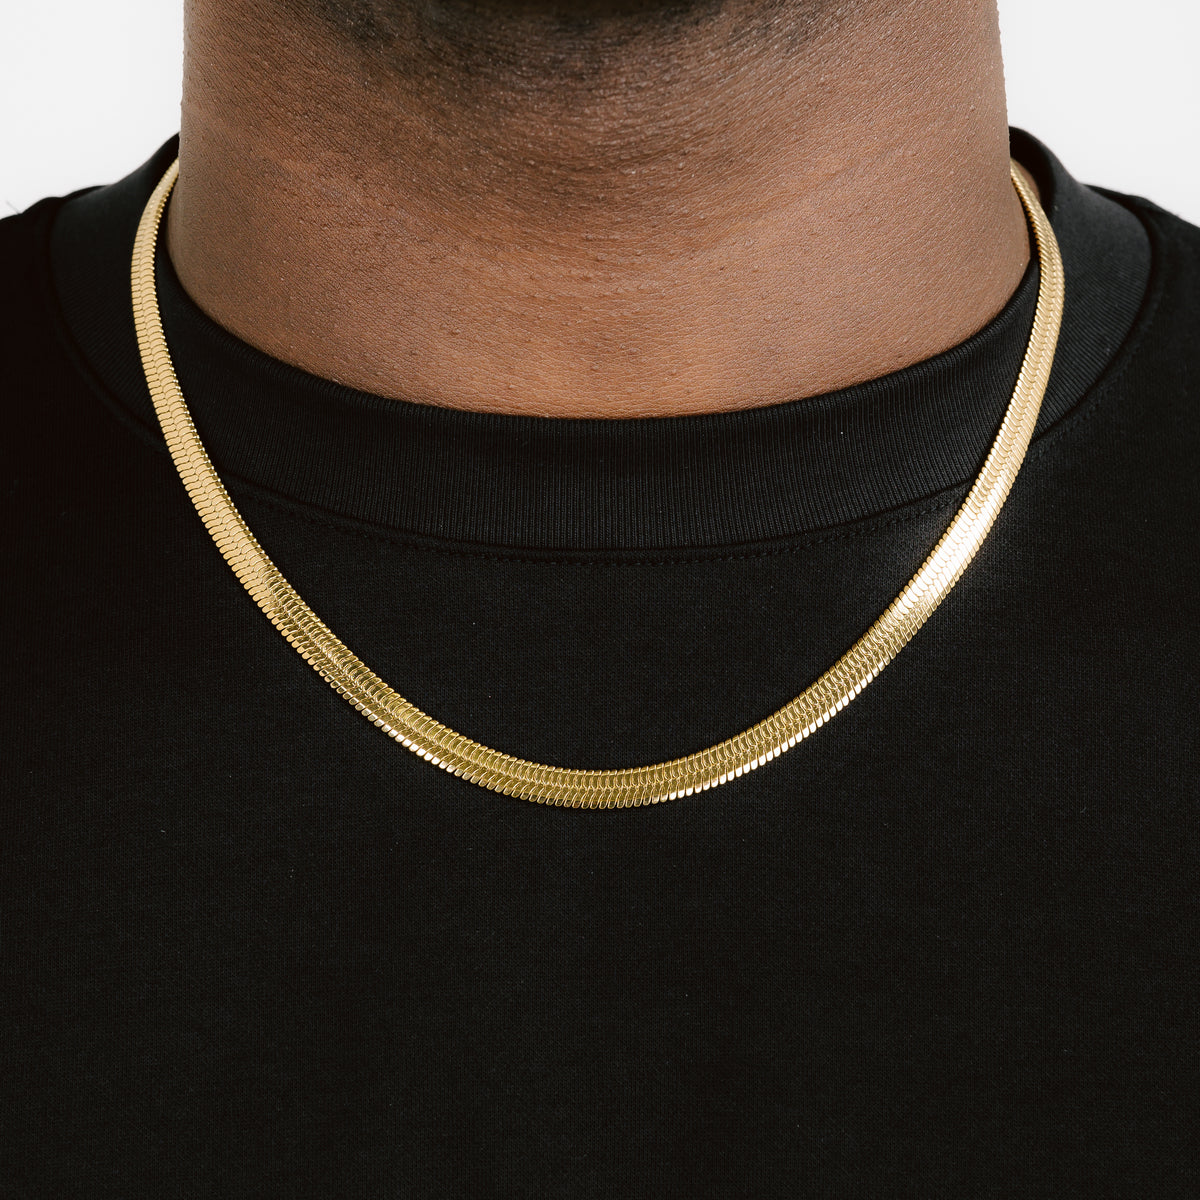 18K Thick Gold Plated Flat Snake Herringbone Chain Necklace with Green Gem  - $25 (61% Off Retail) New With Tags - From Cloulou